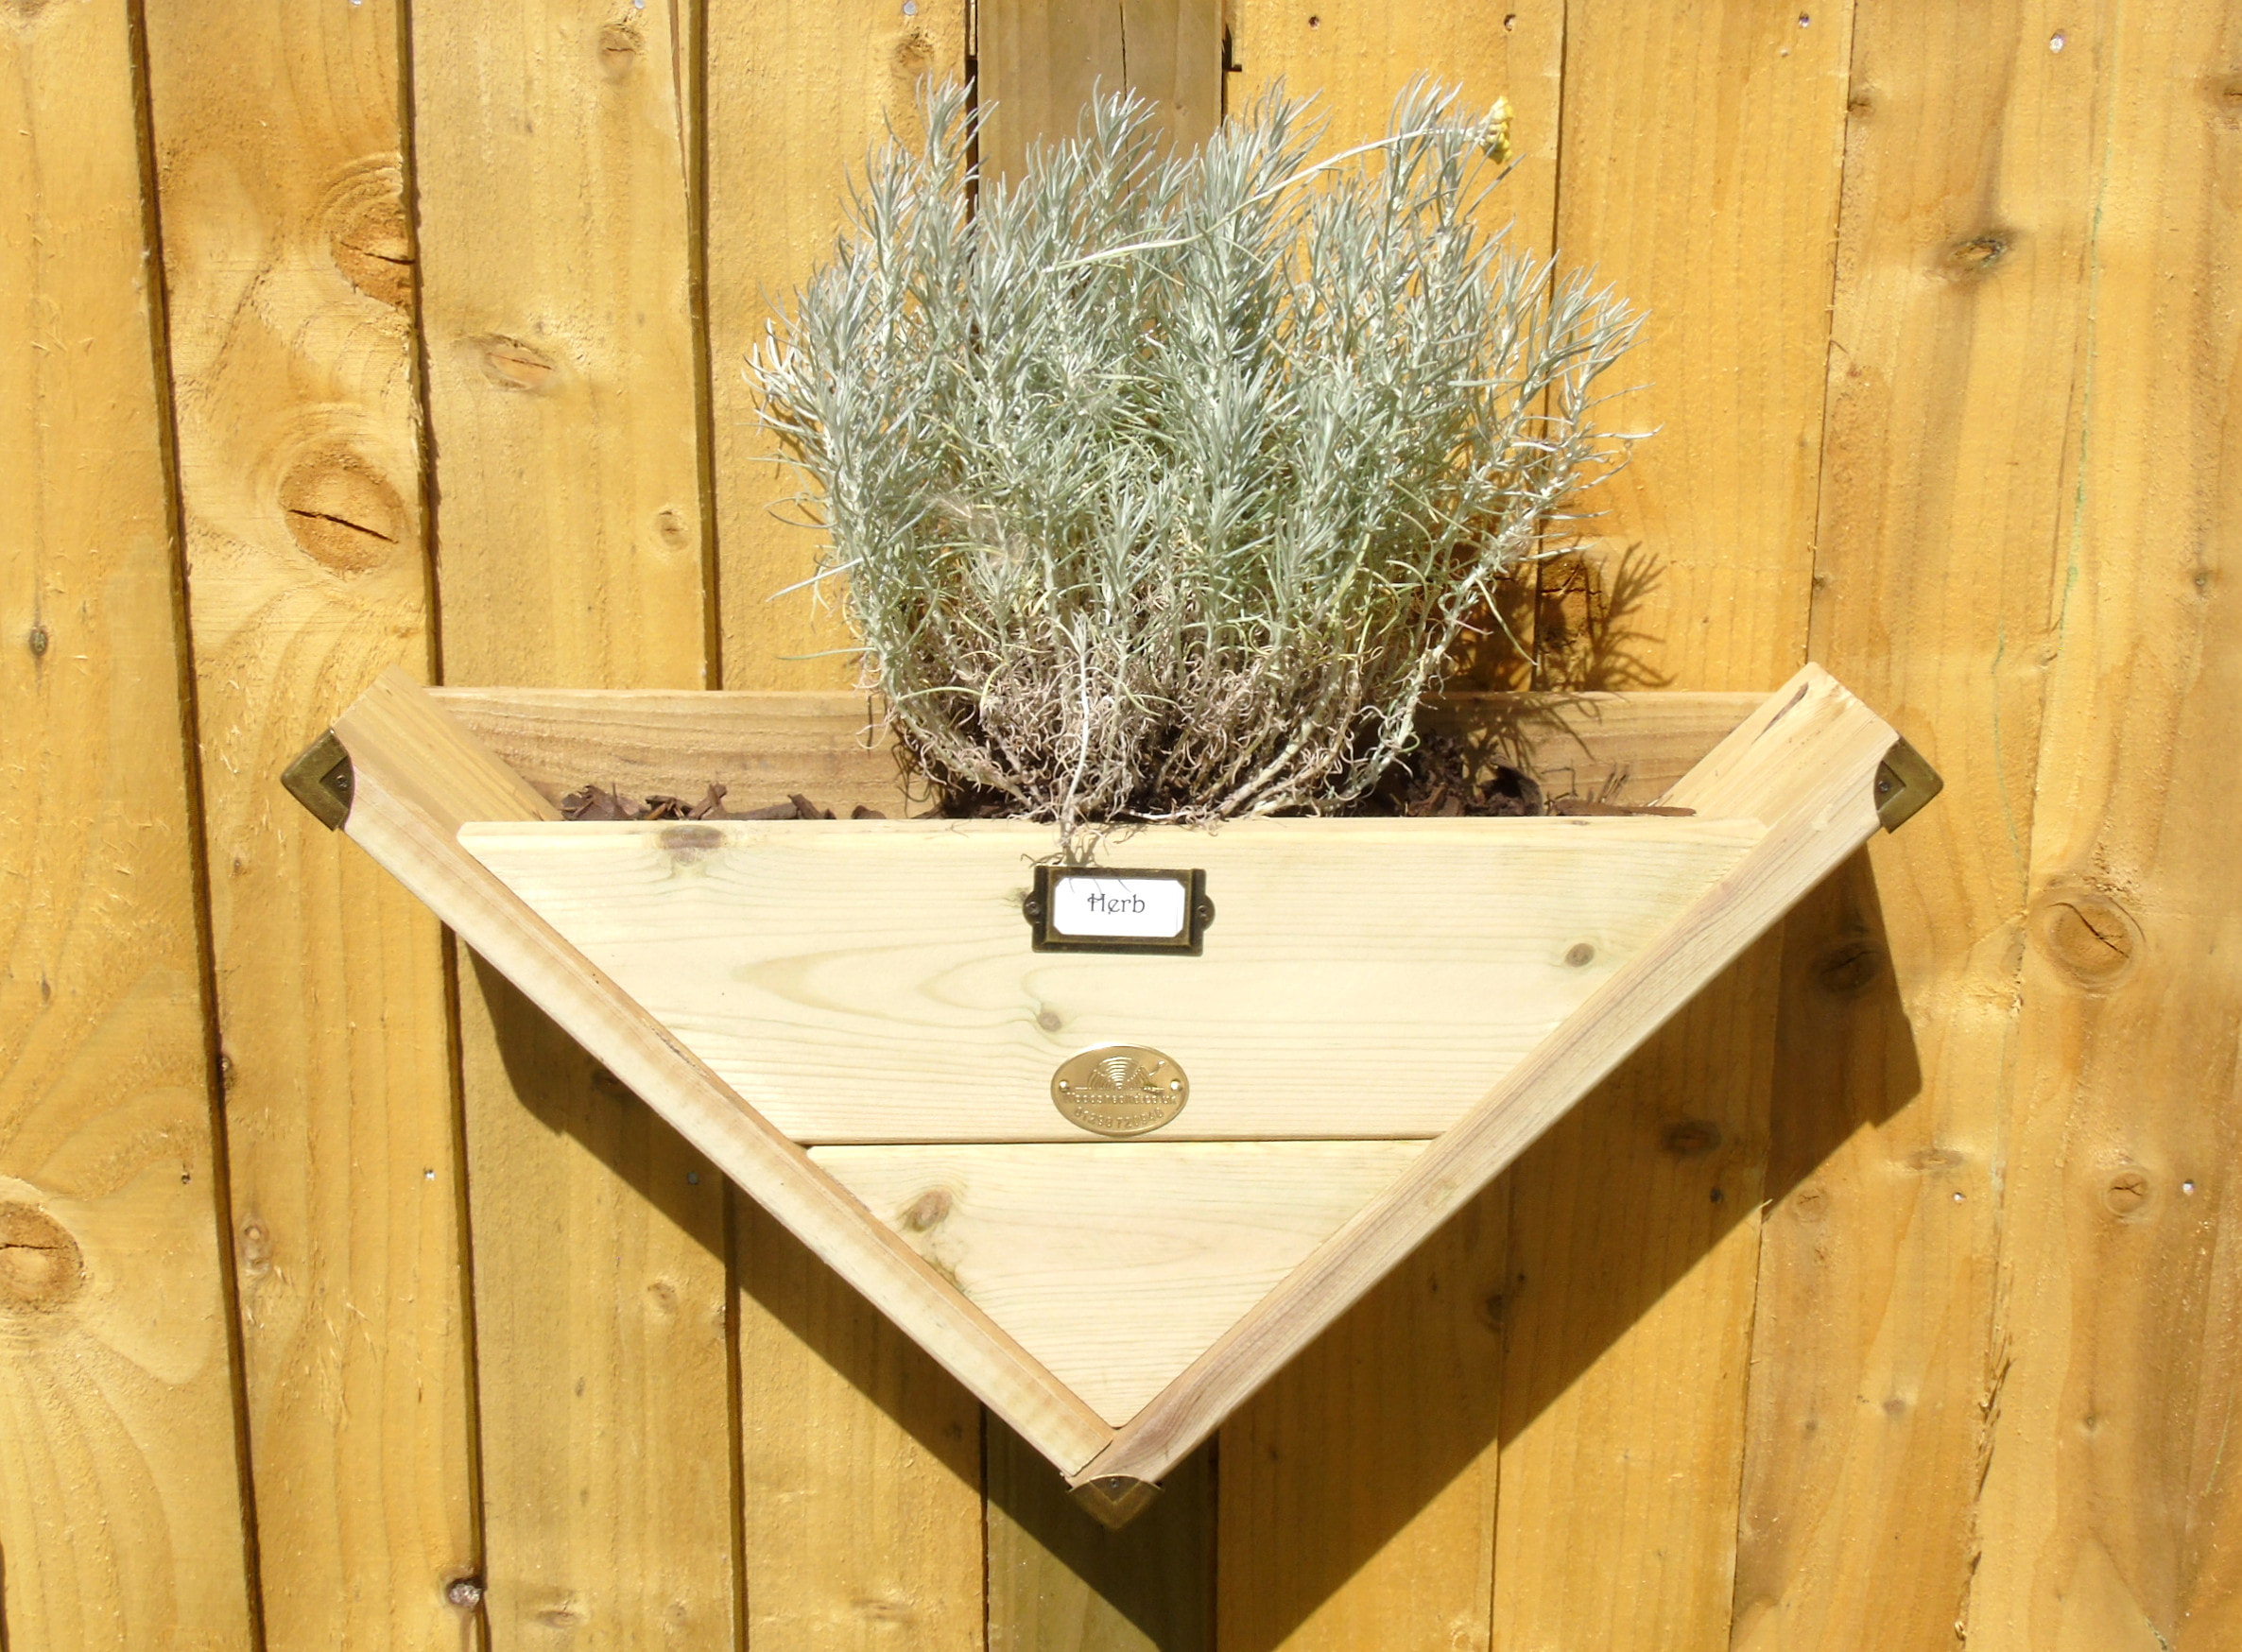 90° Triangle / Herb / Wall Hanging / Fence Post Mounted 